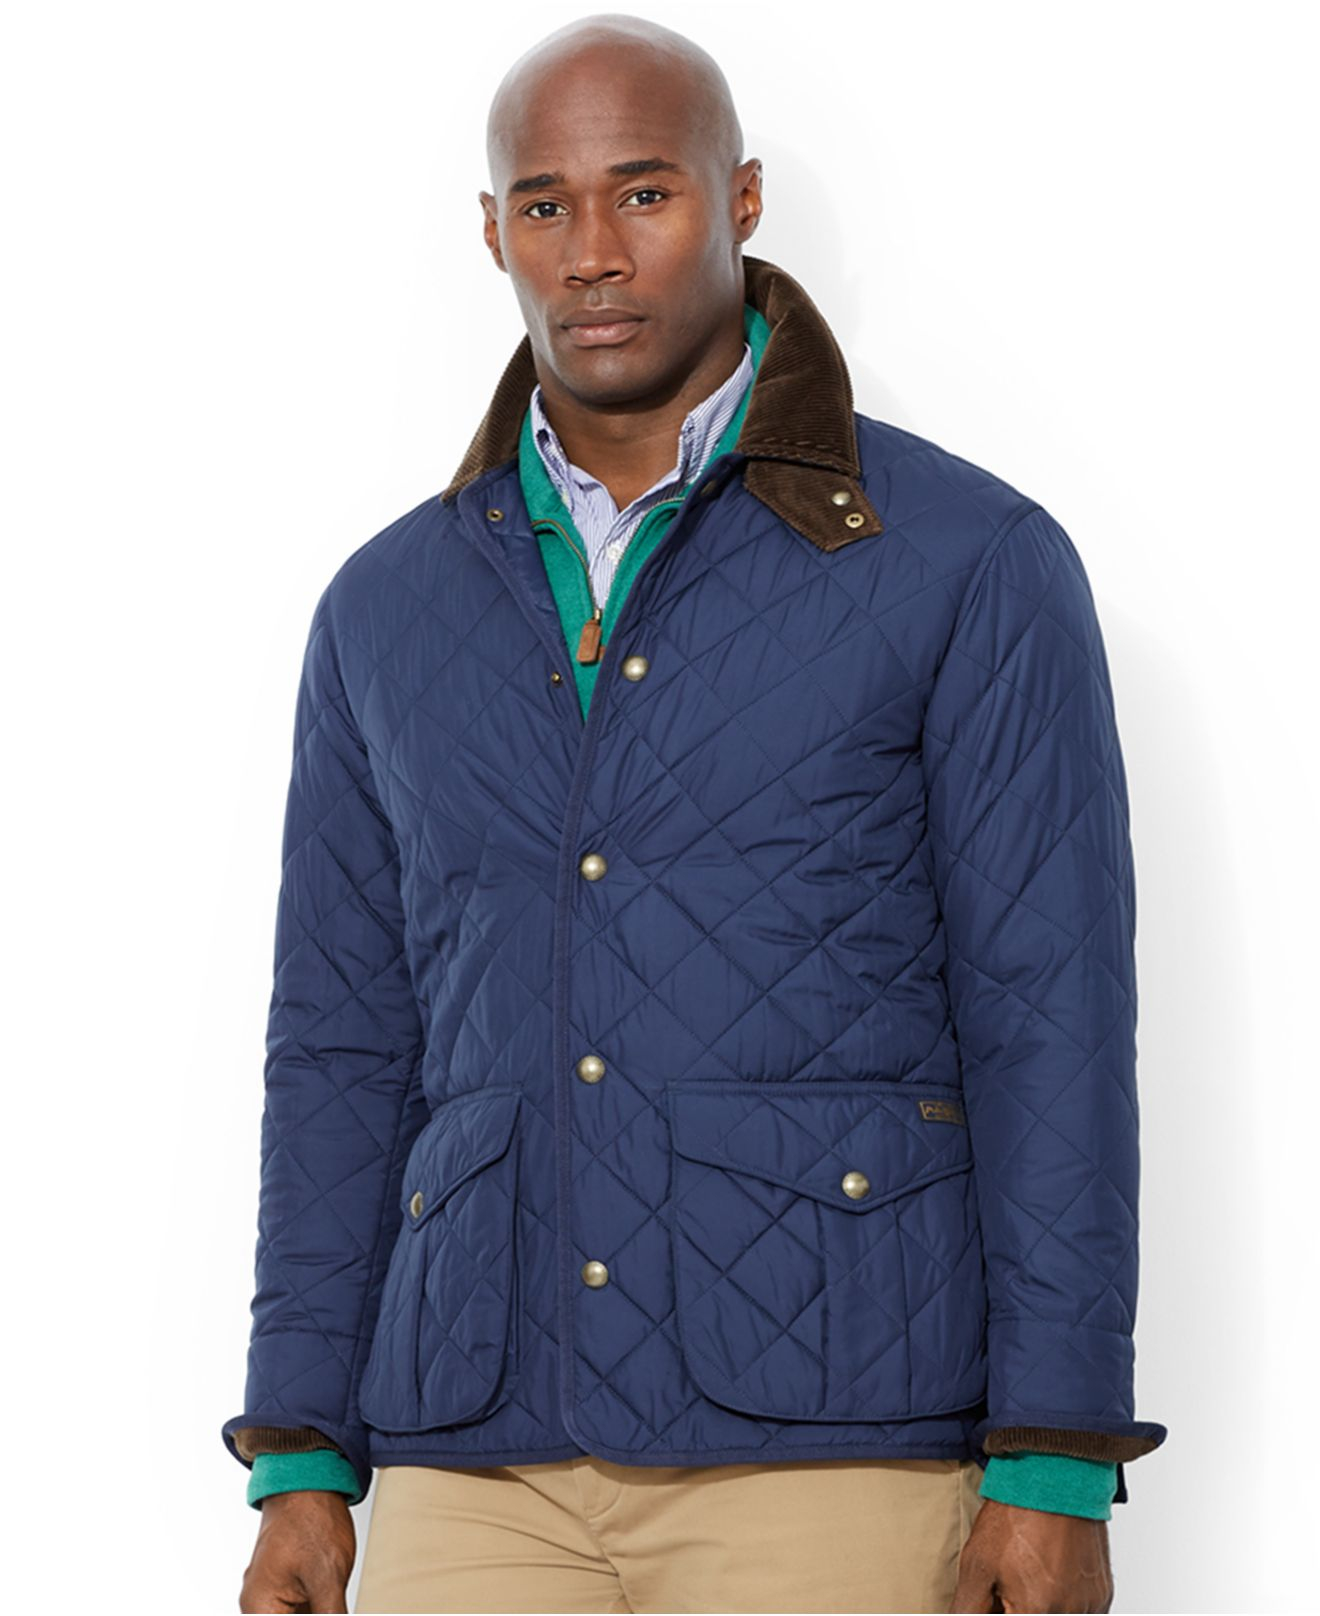 Lyst - Polo ralph lauren Big And Tall Danbury Quilted Jacket in Blue ...